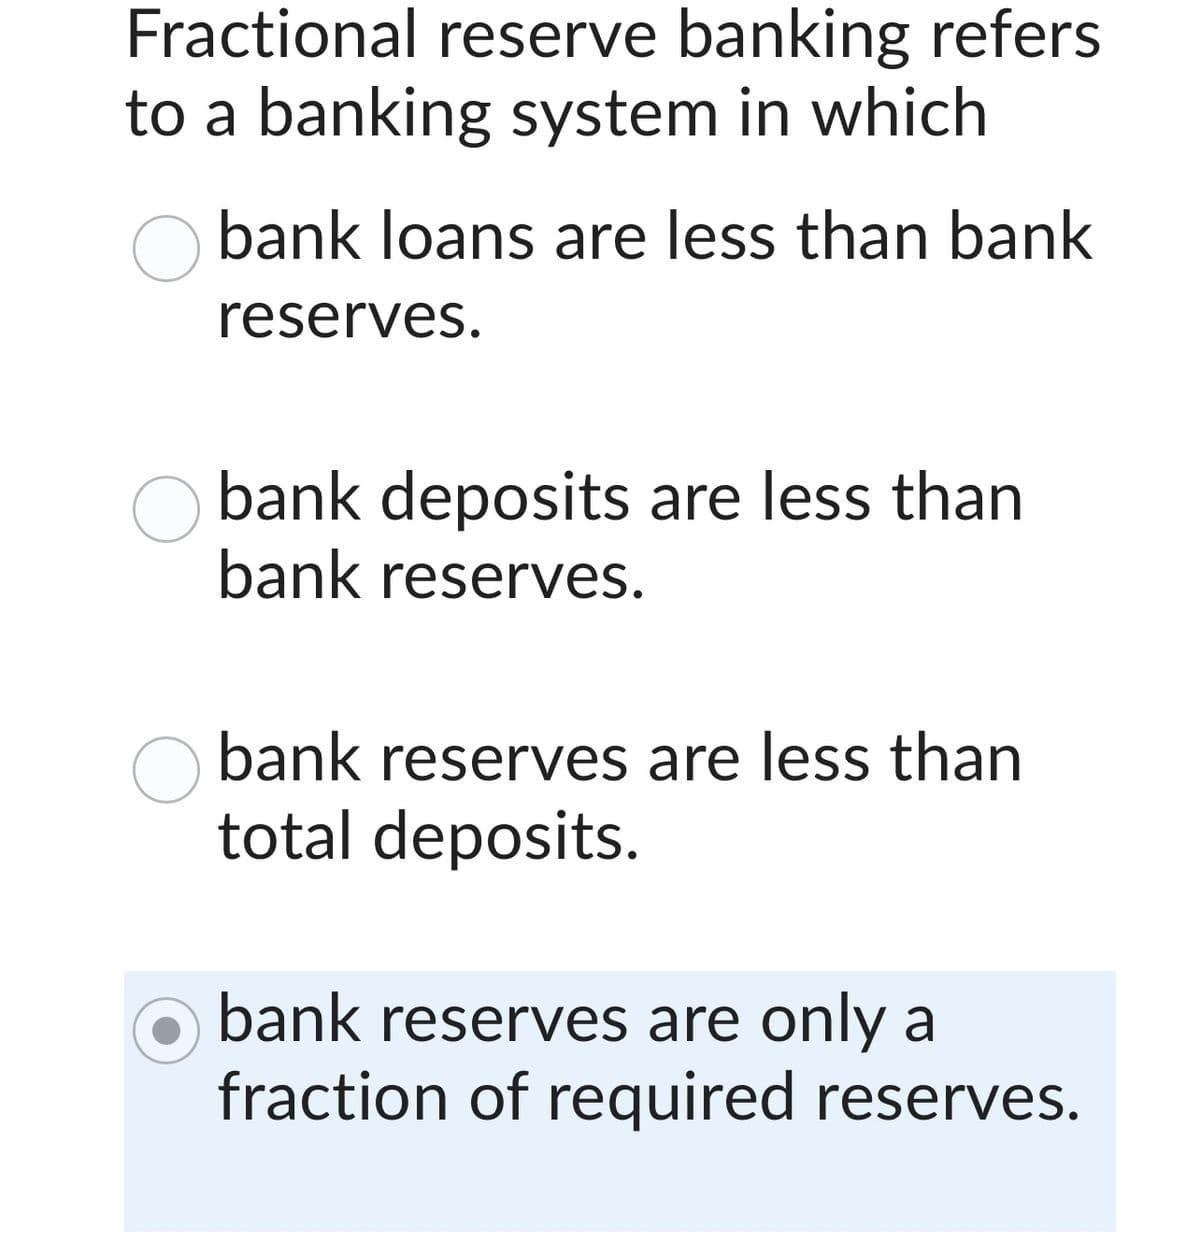 Fractional reserve banking refers
to a banking system in which
bank loans are less than bank
reserves.
bank deposits are less than
bank reserves.
bank reserves are less than
total deposits.
bank reserves are only a
fraction of required reserves.